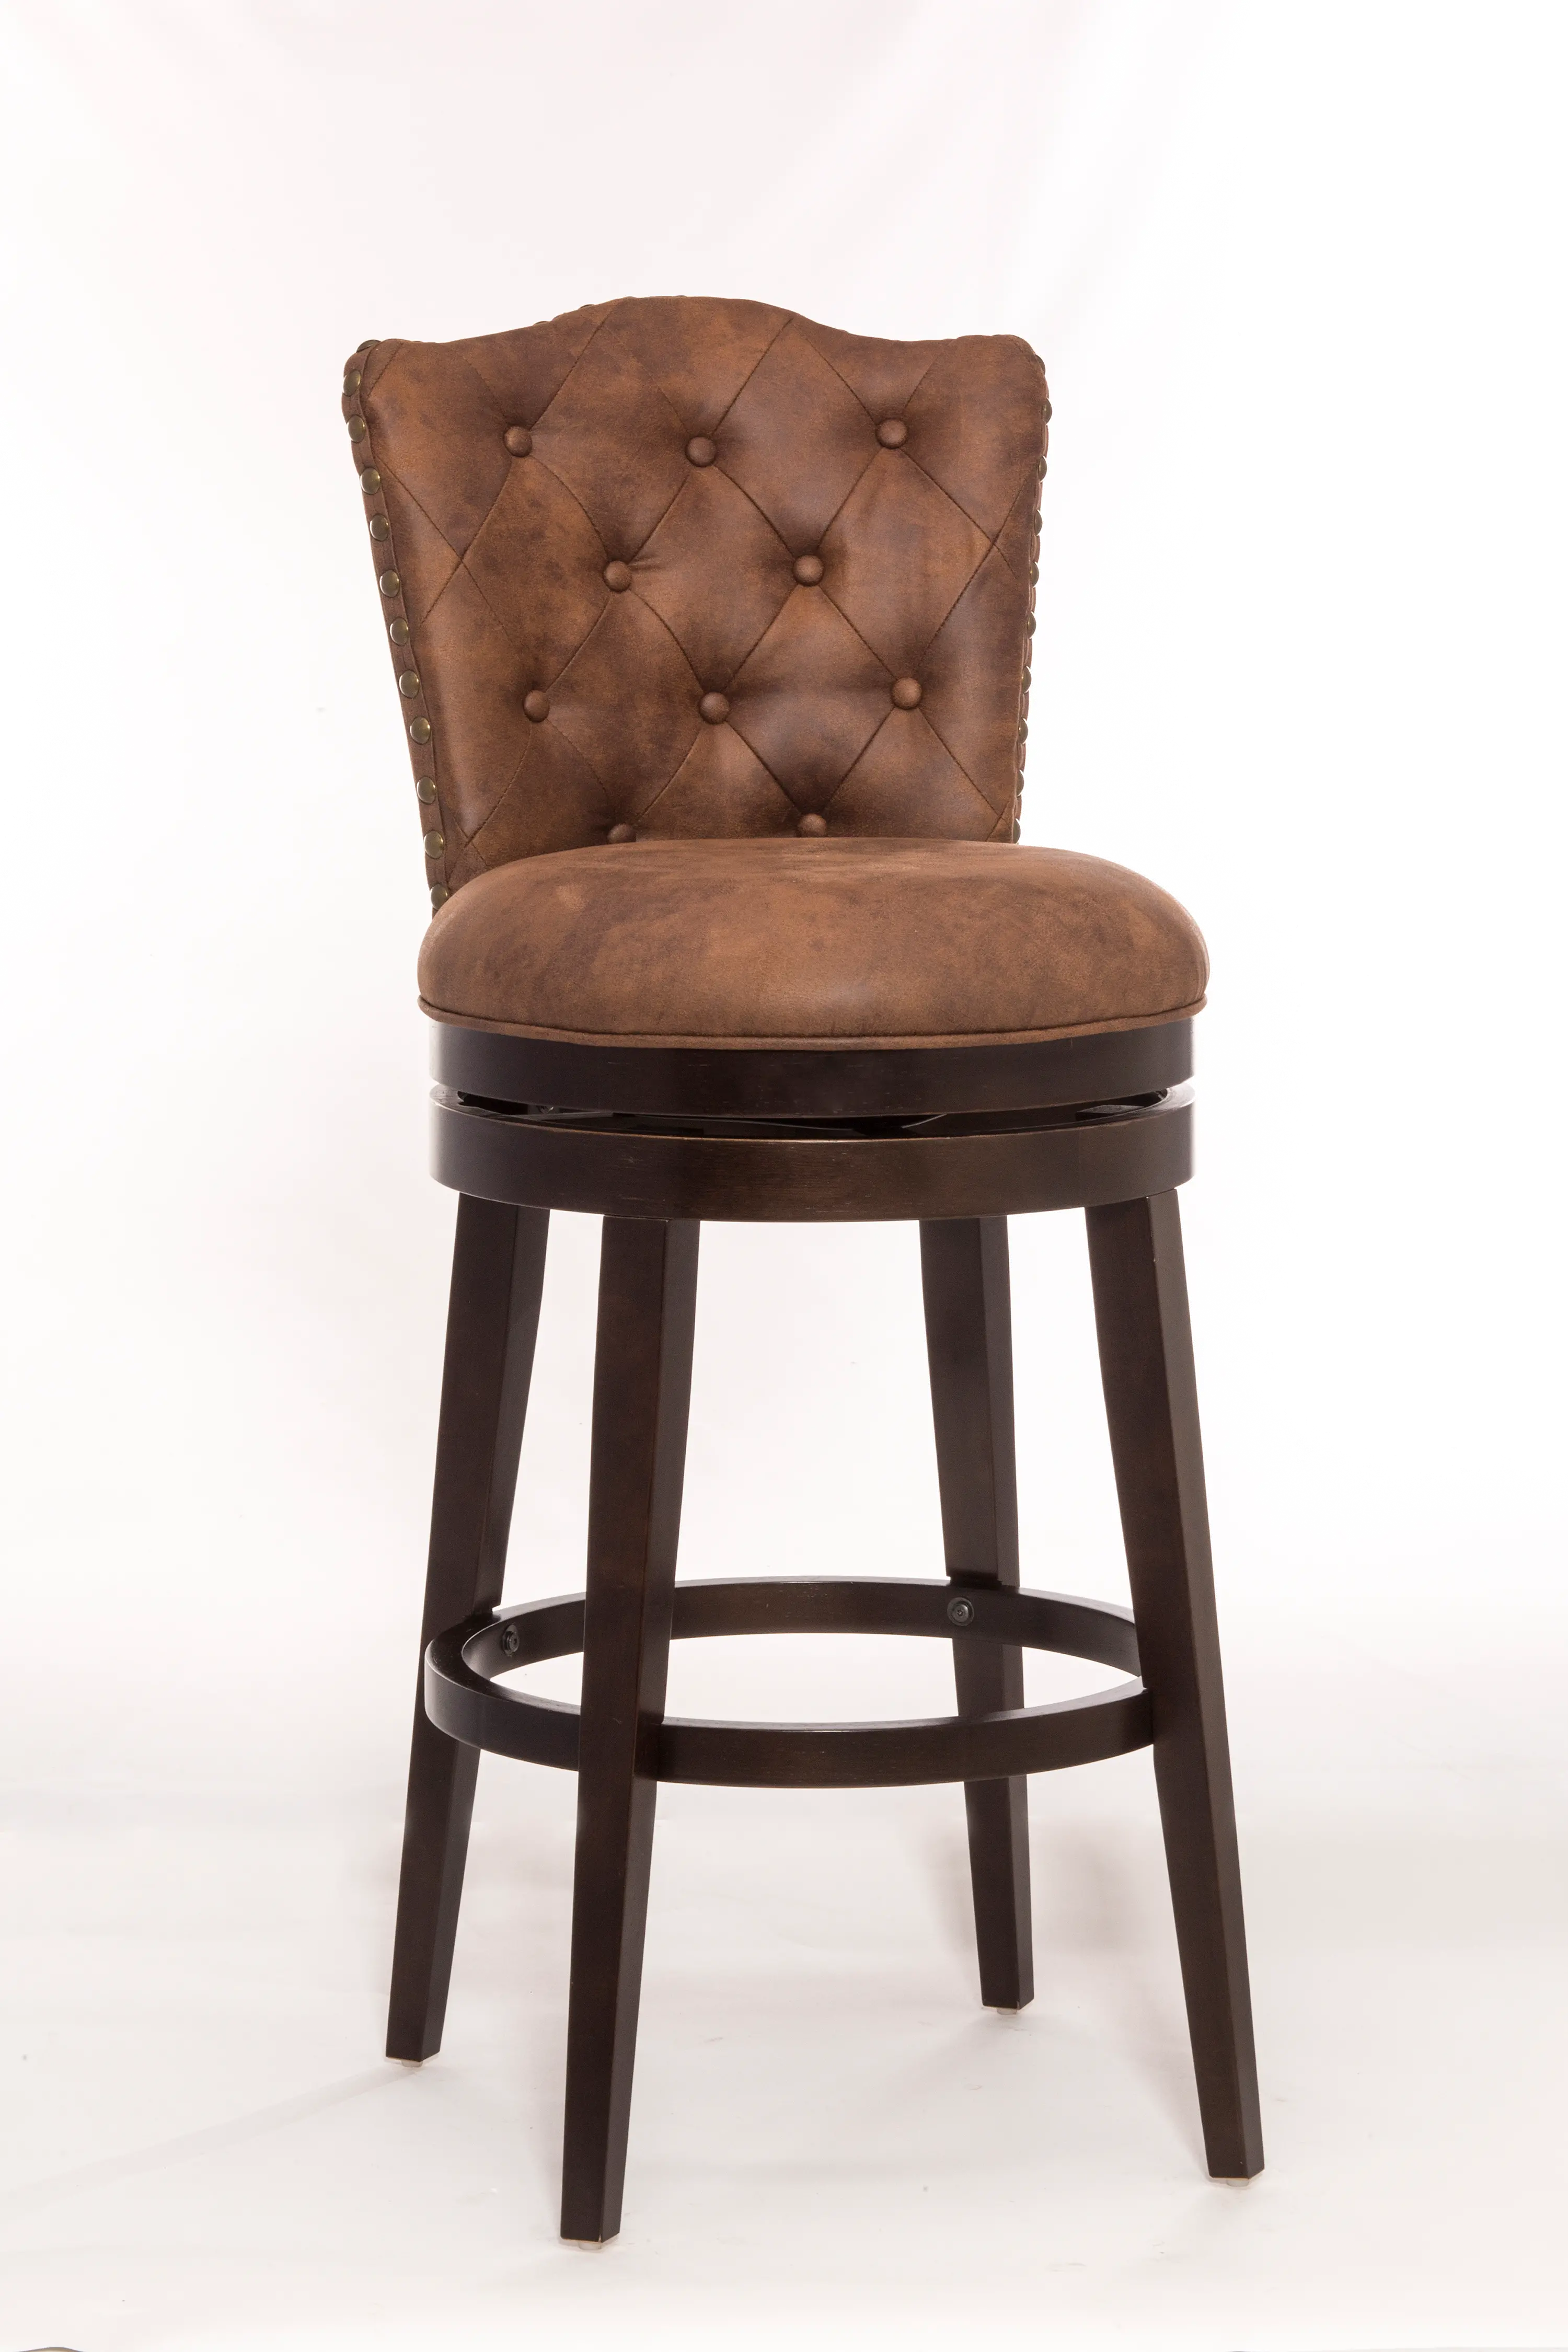 Traditional Chocolate Brown Swivel Counter Height Stool - Edenwood